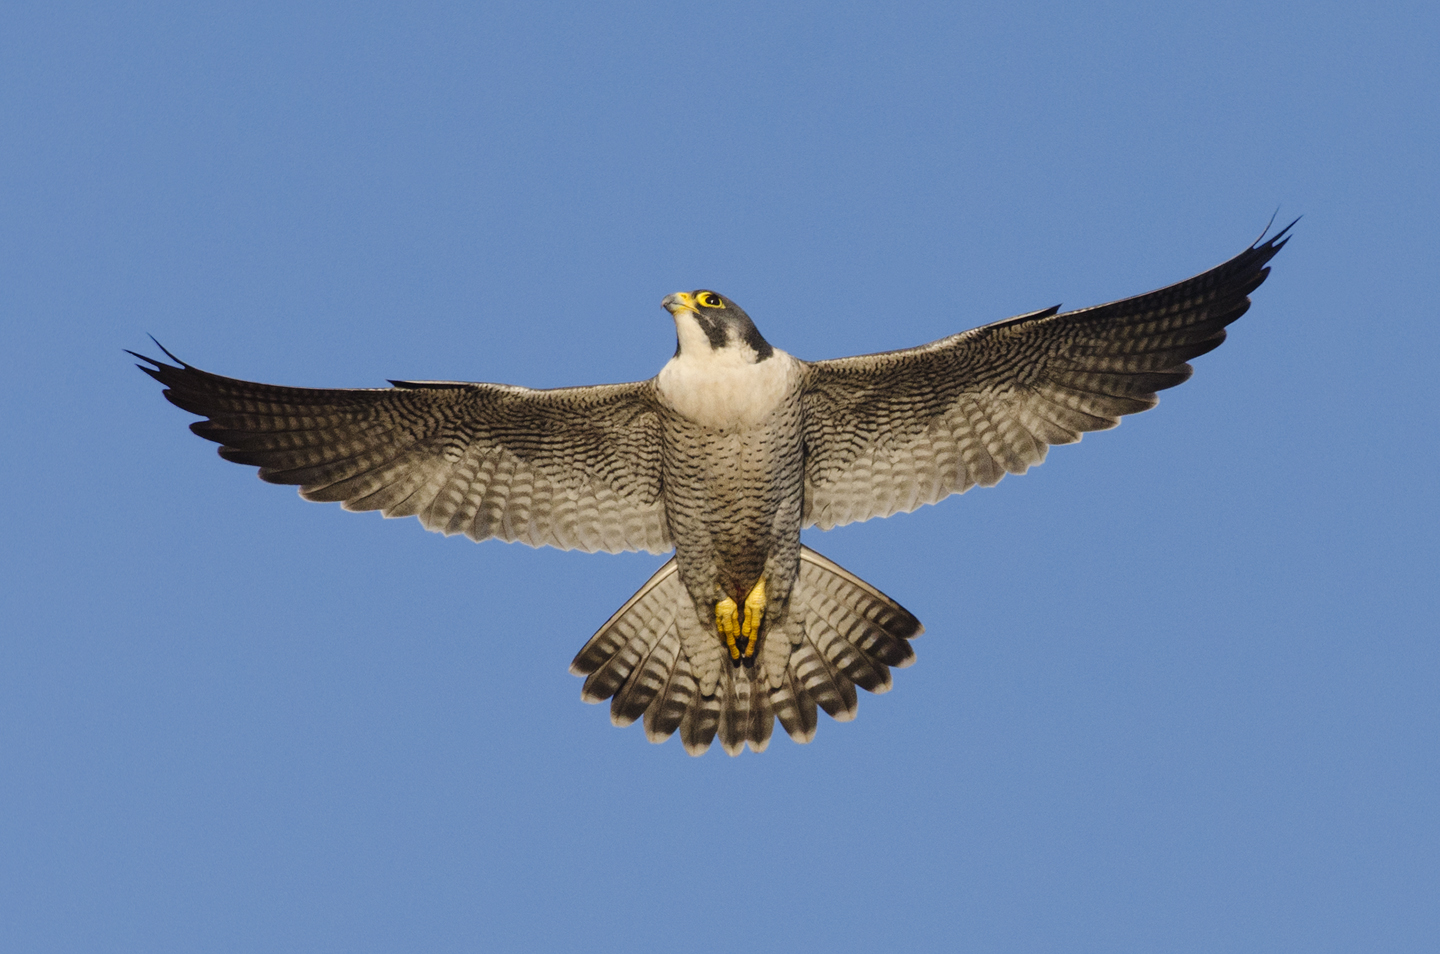  The year starts with flight displays by the tiercel to impress the female. Flight and ledge displays, prey-transfers and other courtship rituals are important in pair bonding 